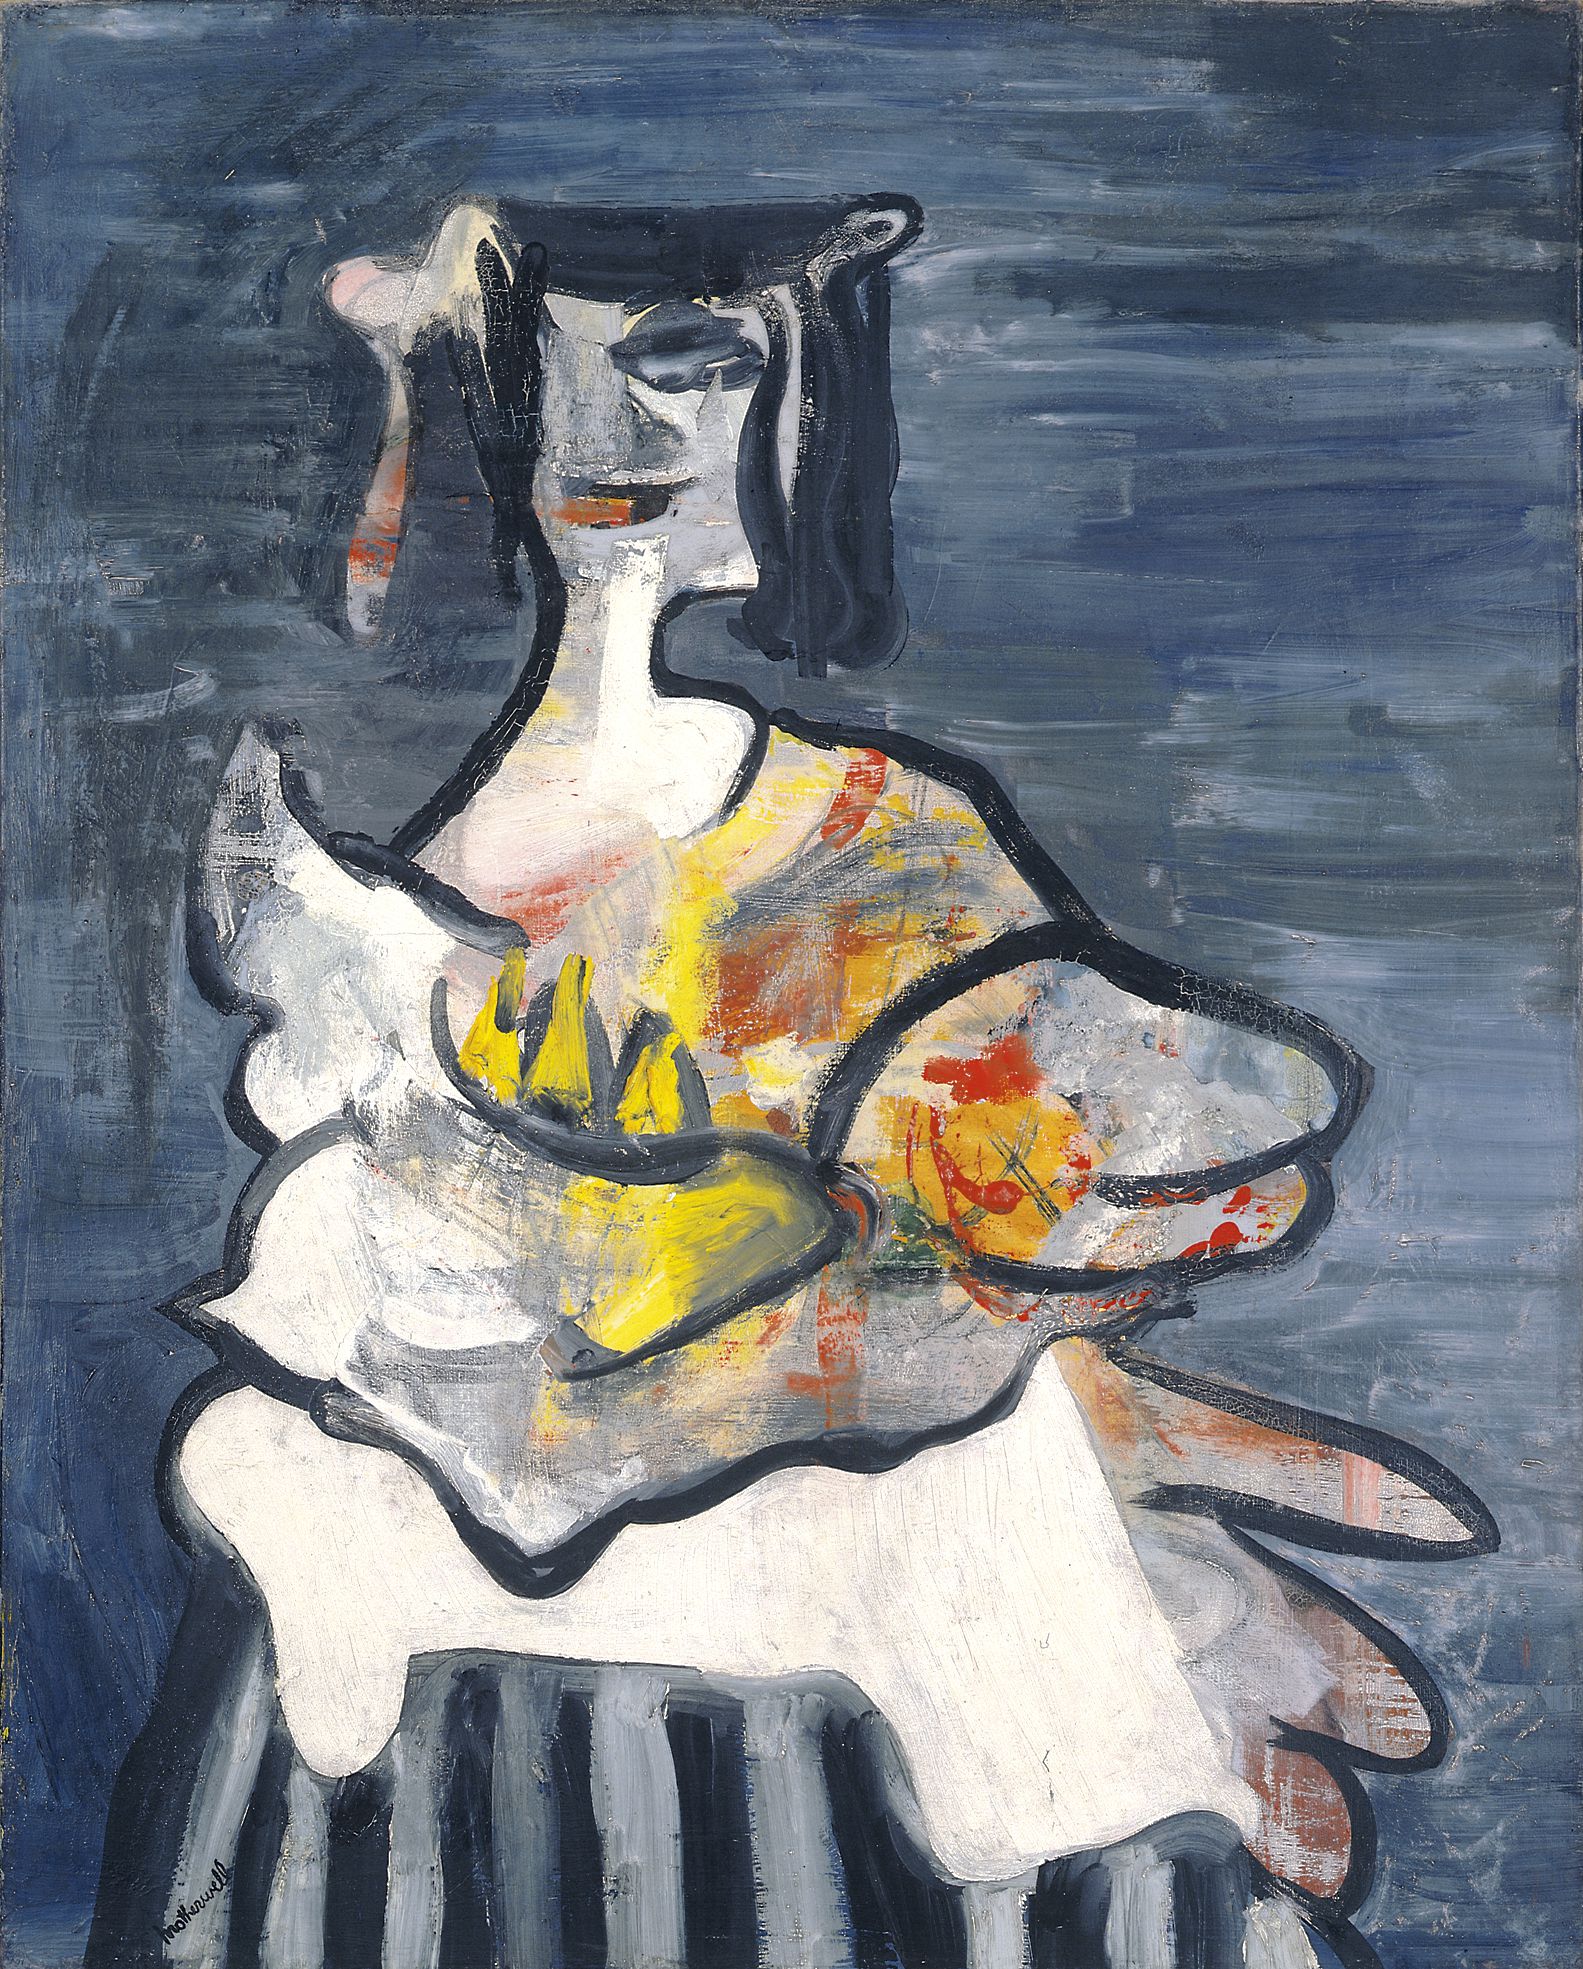 La Belle Mexicaine (Maria), 1941, Oil on canvas, 29 1/2 ✕ 23 3/4 in. (74.9 ✕ 60.3 cm)